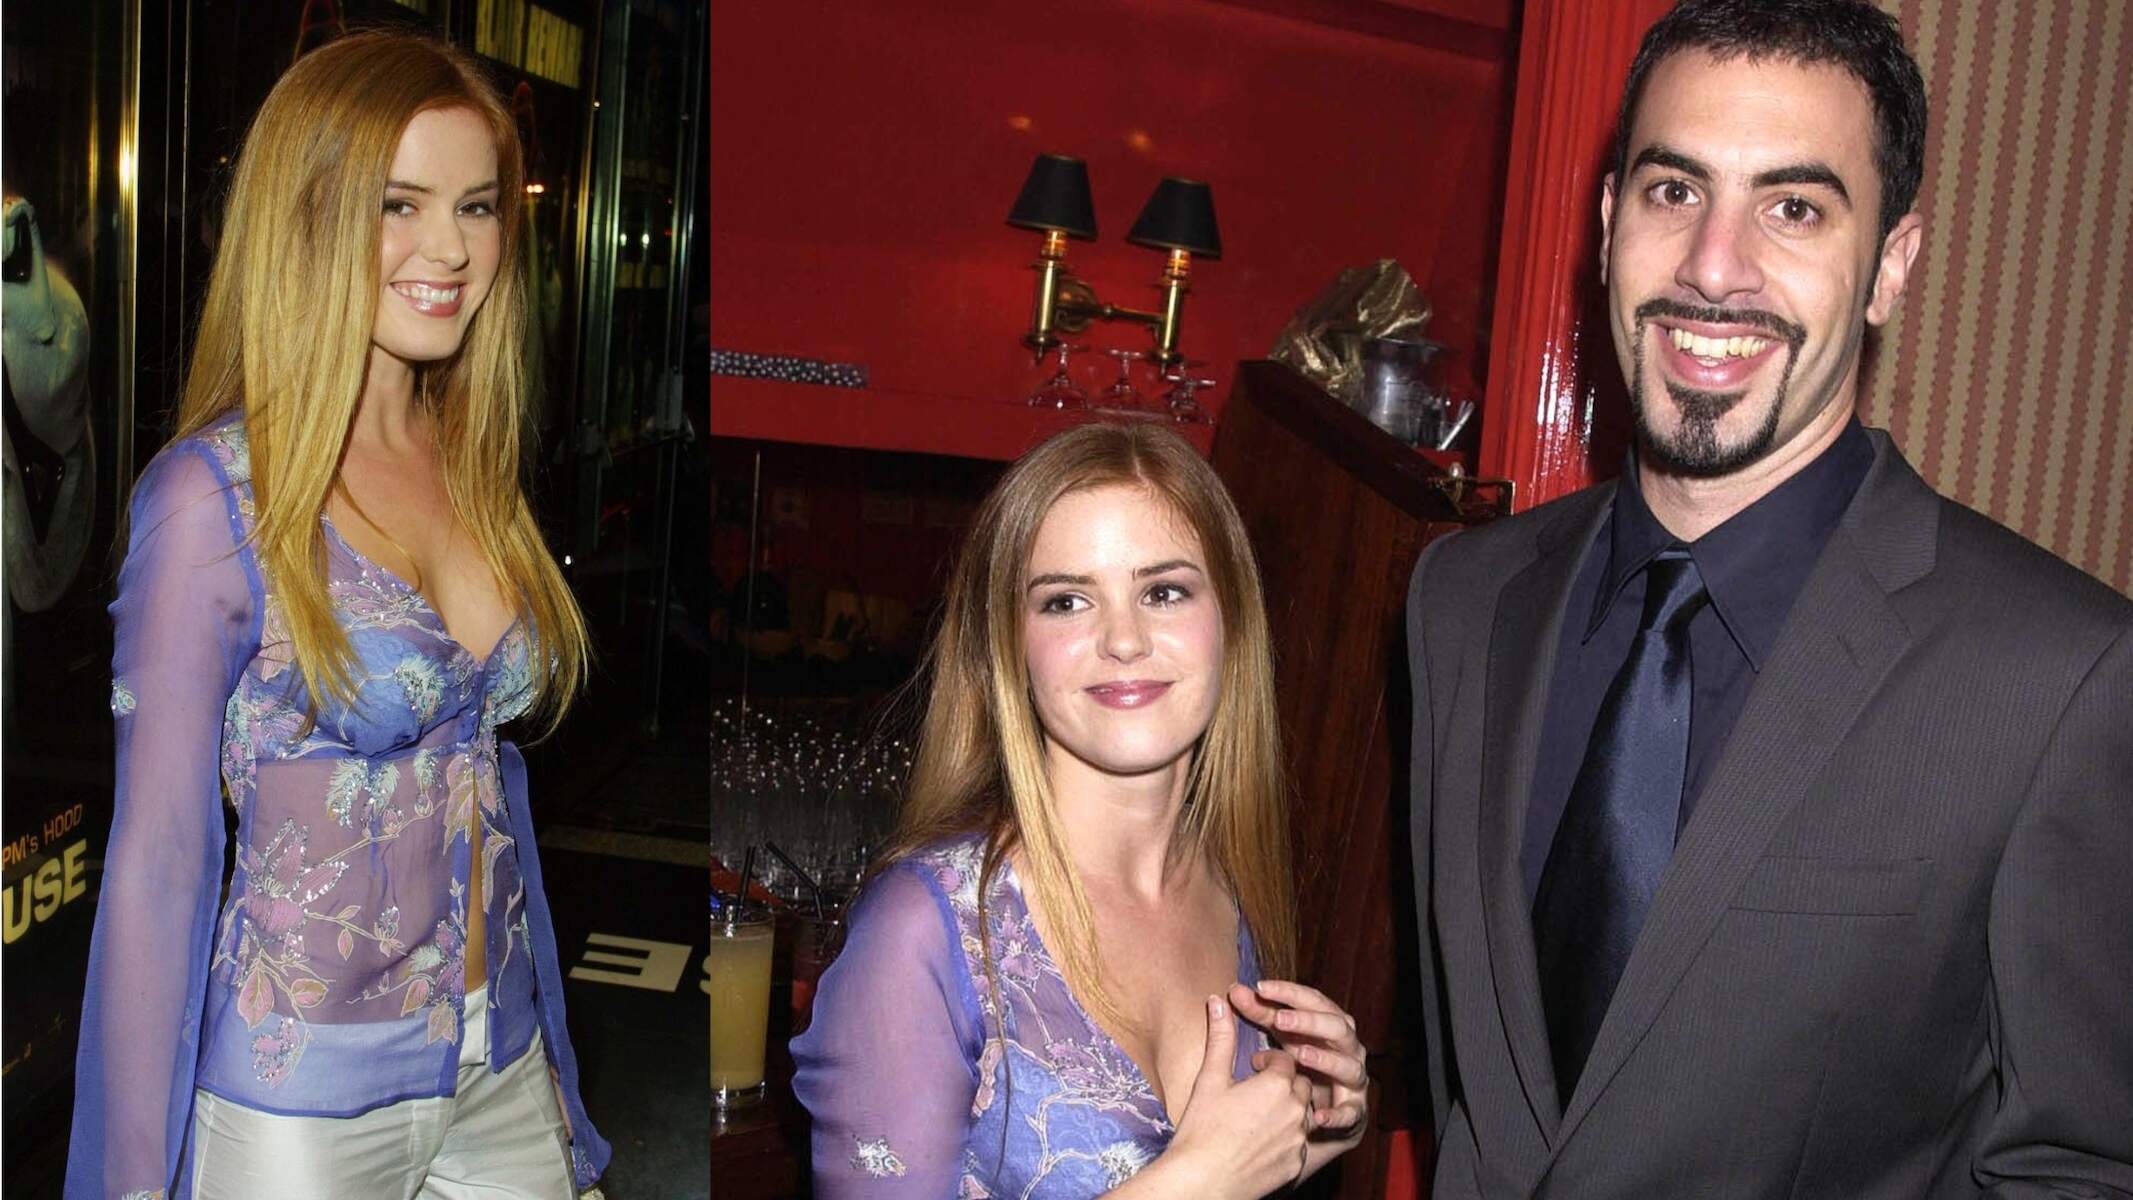 Isla Fisher and Sacha Baron Cohen smile together at the film premiere of 'Ali G In Da House' when they first started dating